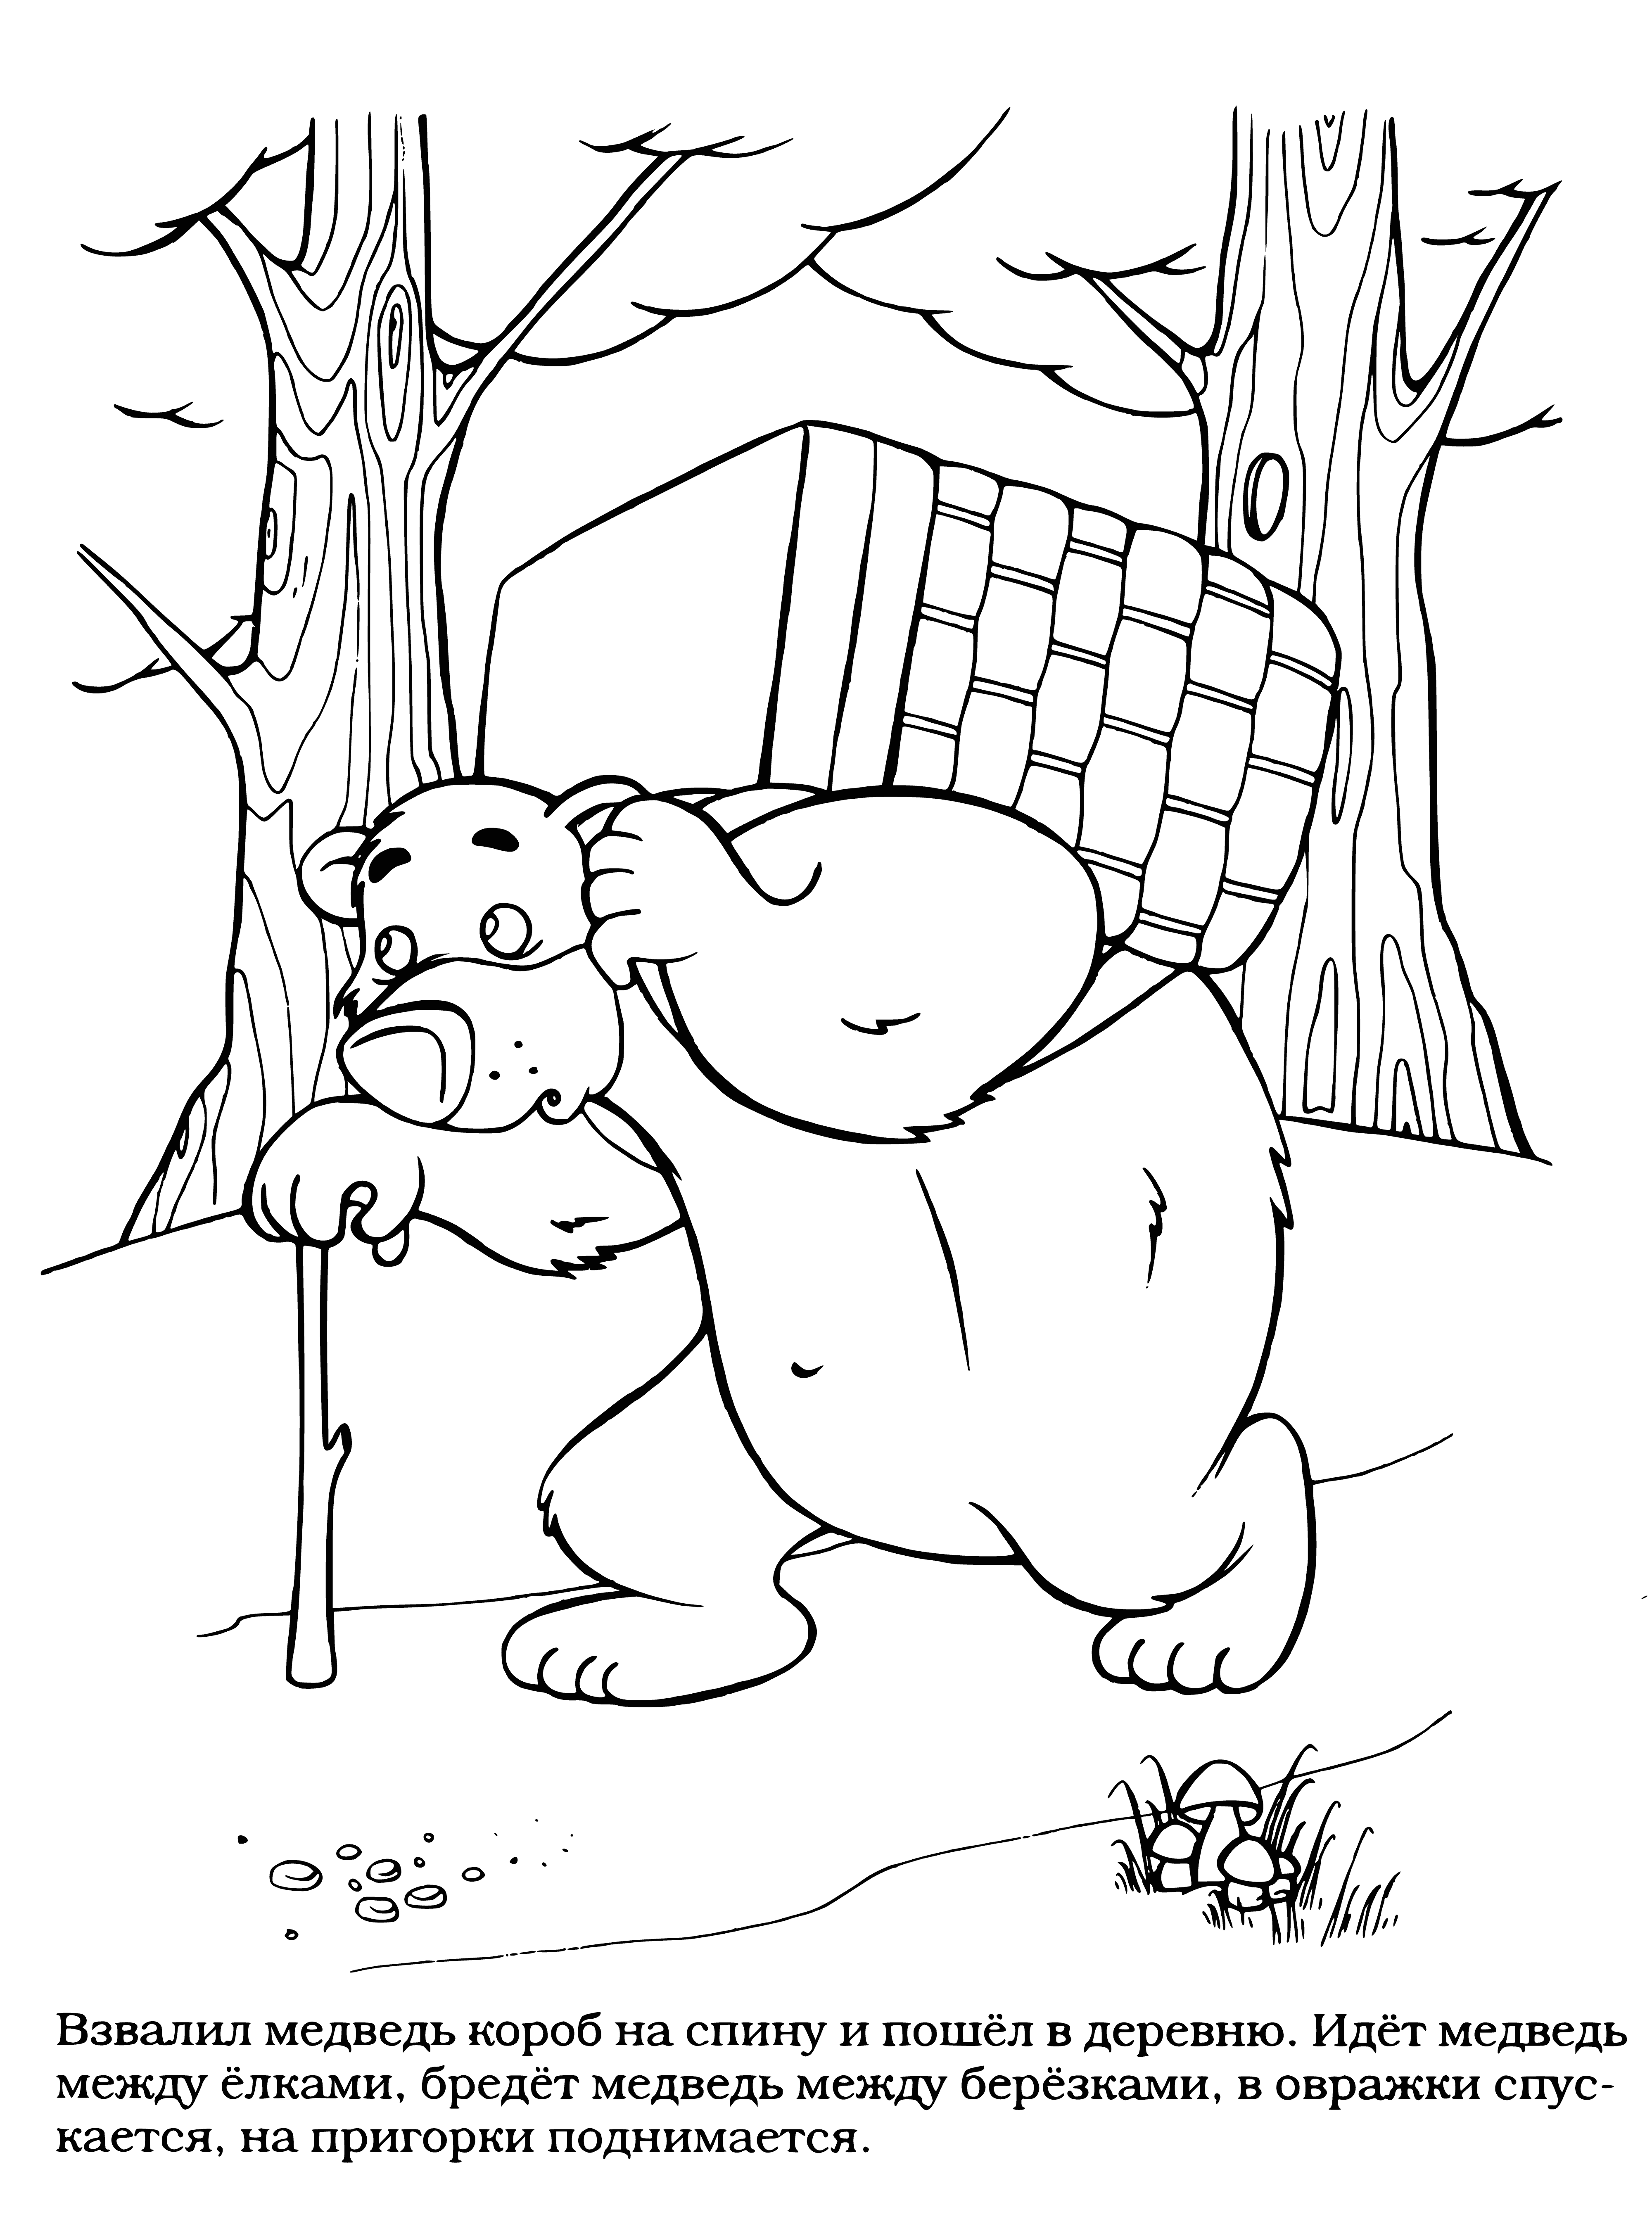 coloring page: Small girl looks happy & excited while bear looks gentle & friendly; they're next to a coloring page. #storytime